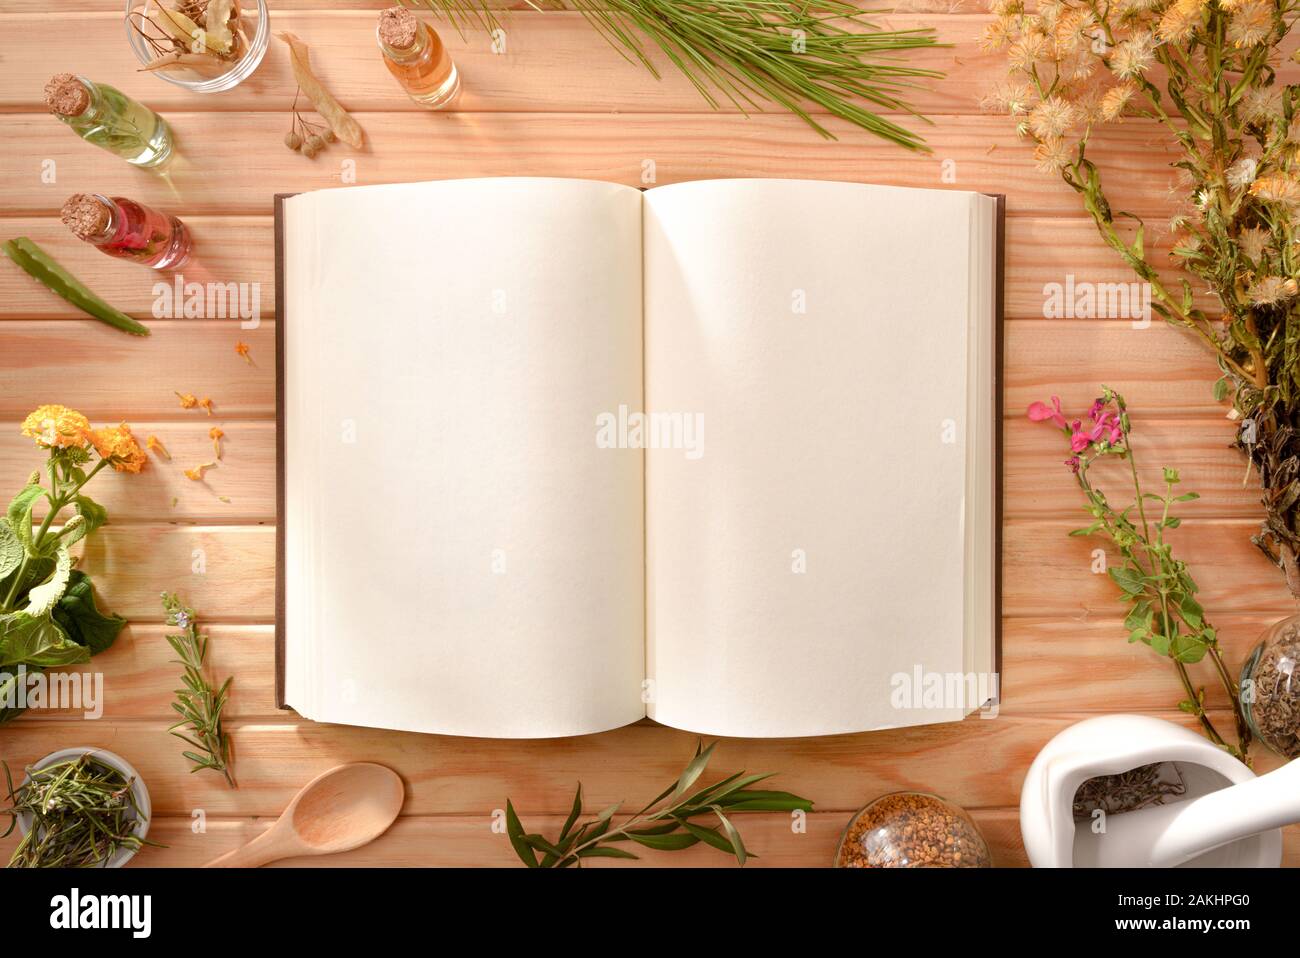 Blank book of recipes for the preparation of natural plant medicine on wooden table with medicinal and aromatic plants. Top view. Horizontal compositi Stock Photo